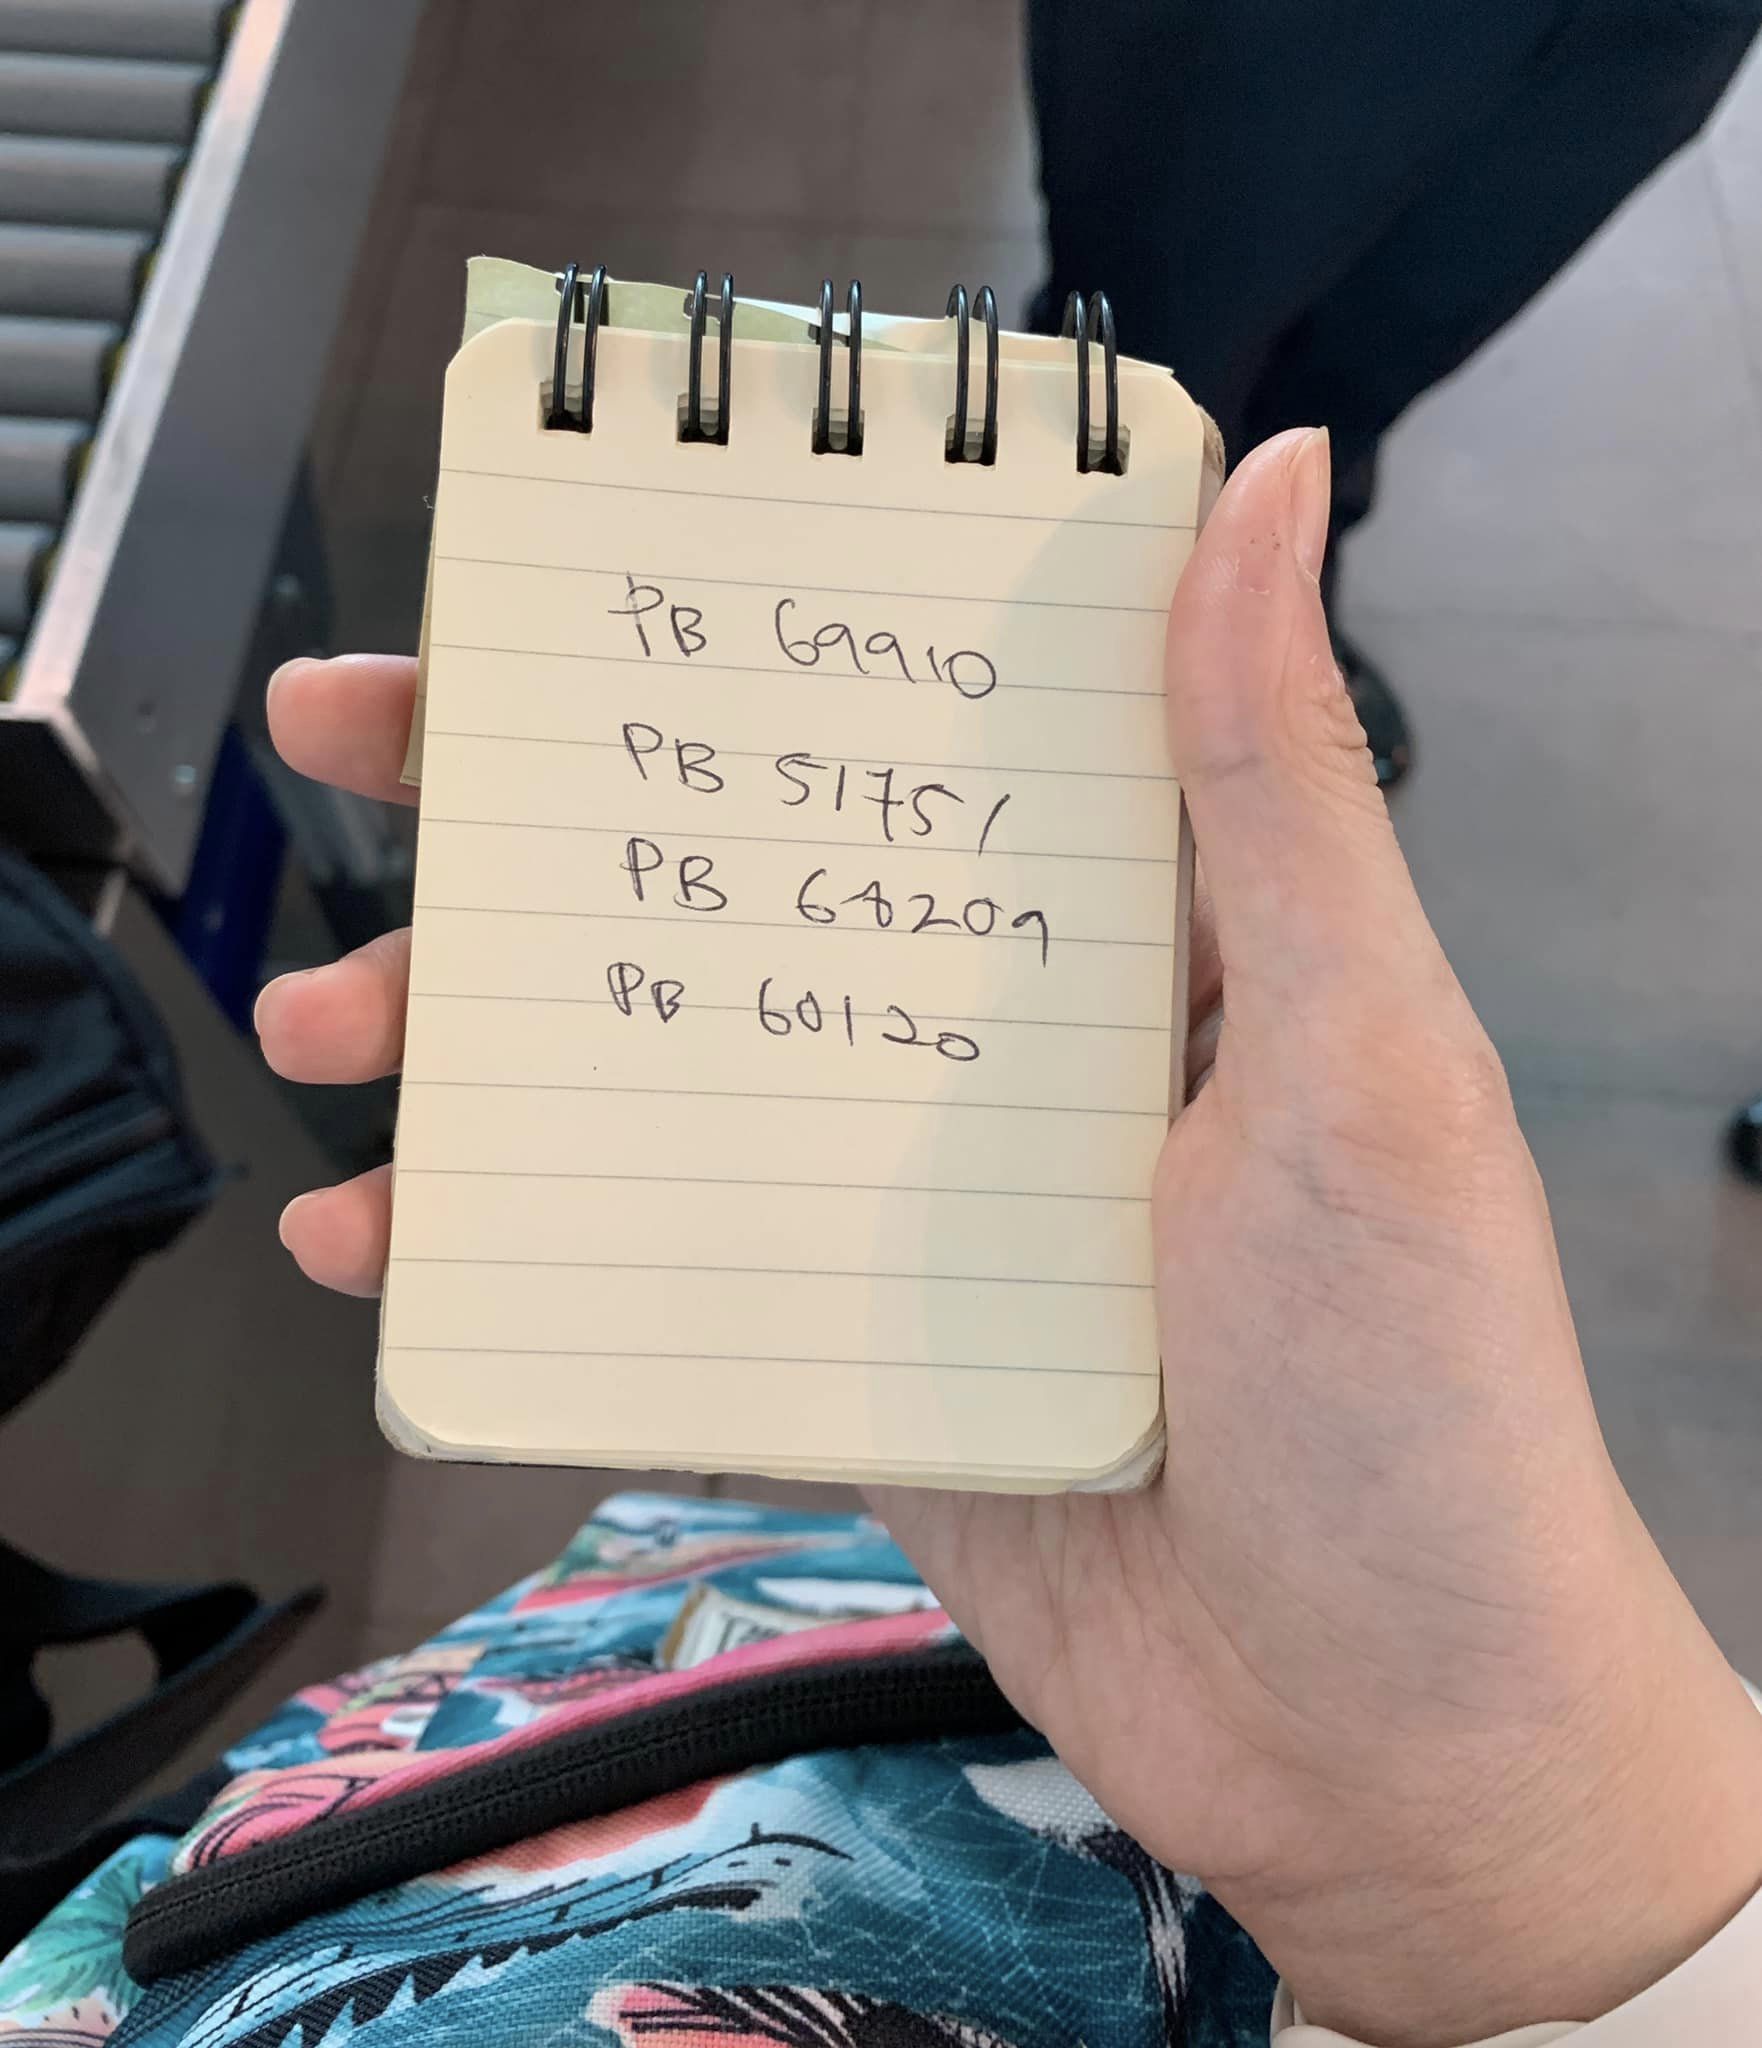 Sue noted down the numbers of the KLIA police staff who managed to help her retrieve her phone. Image credit: Sue Ern